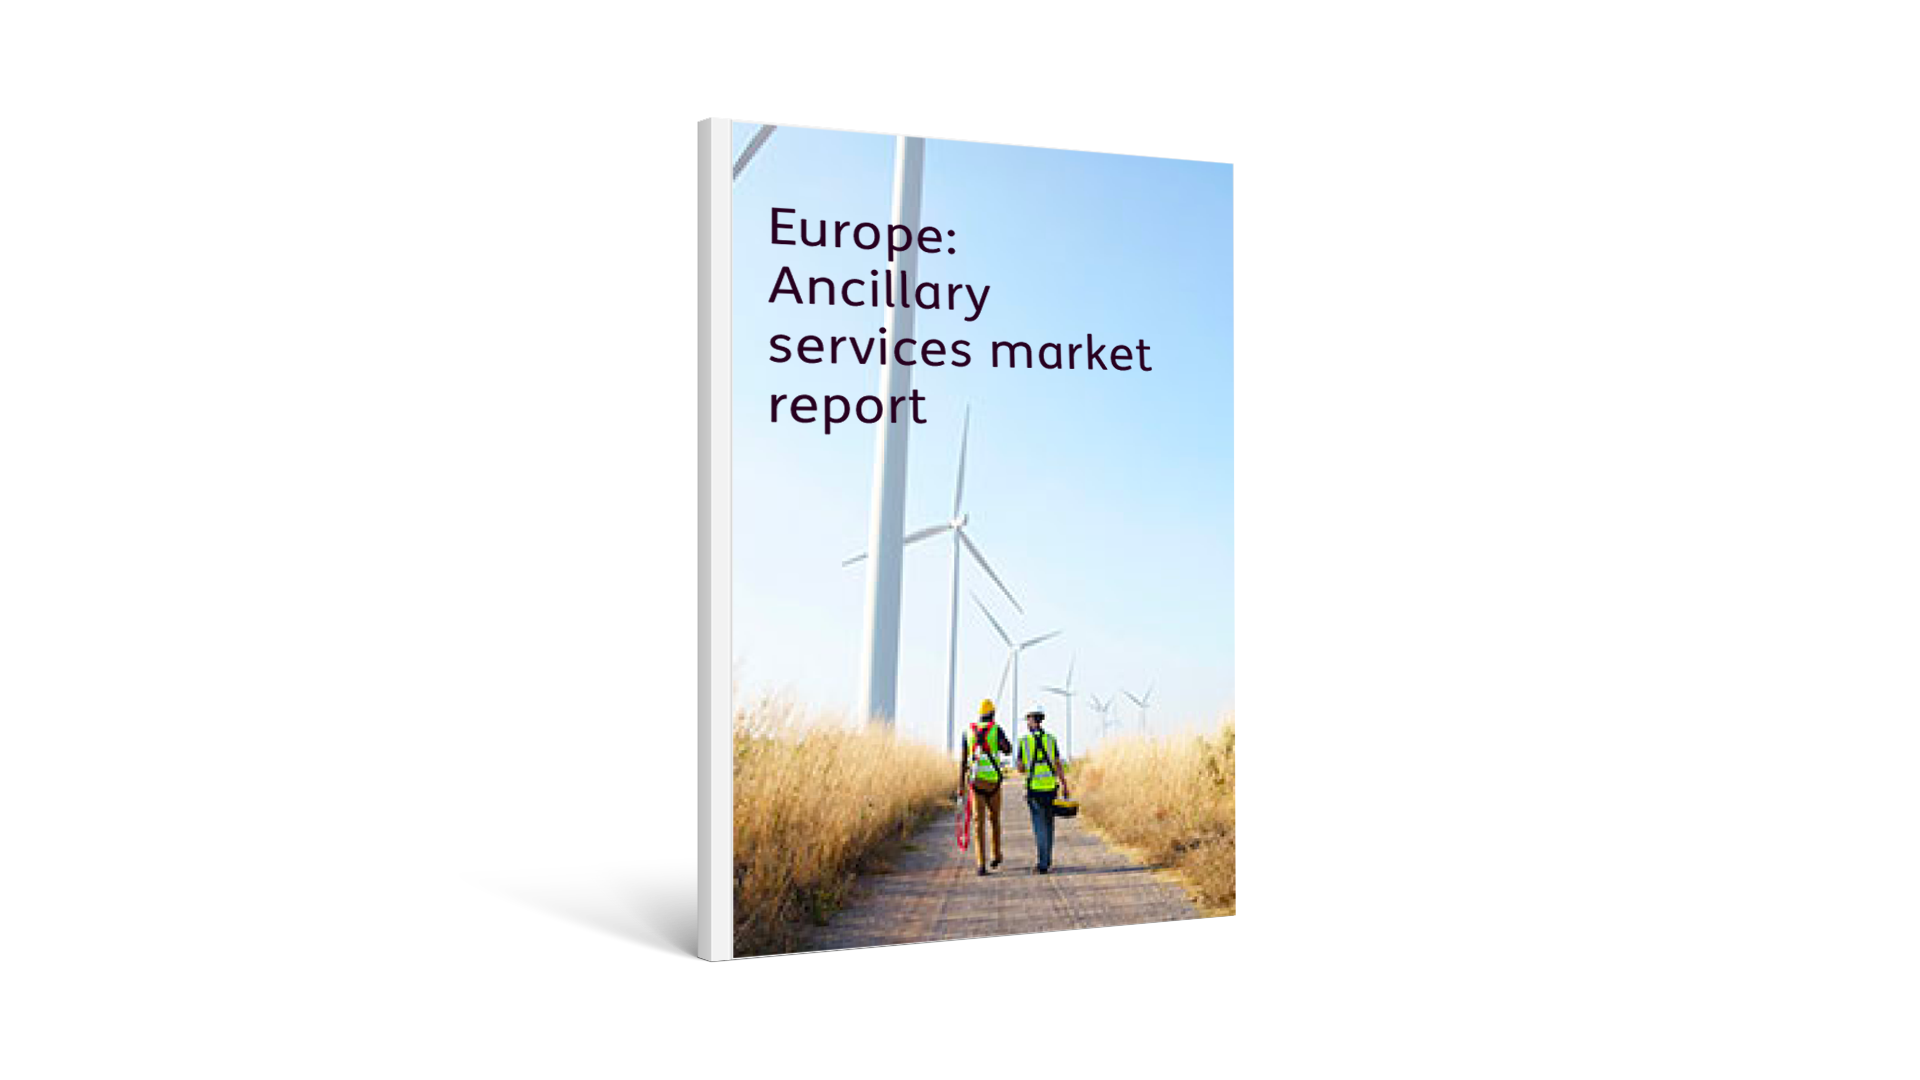 Europe: Ancillary services market report